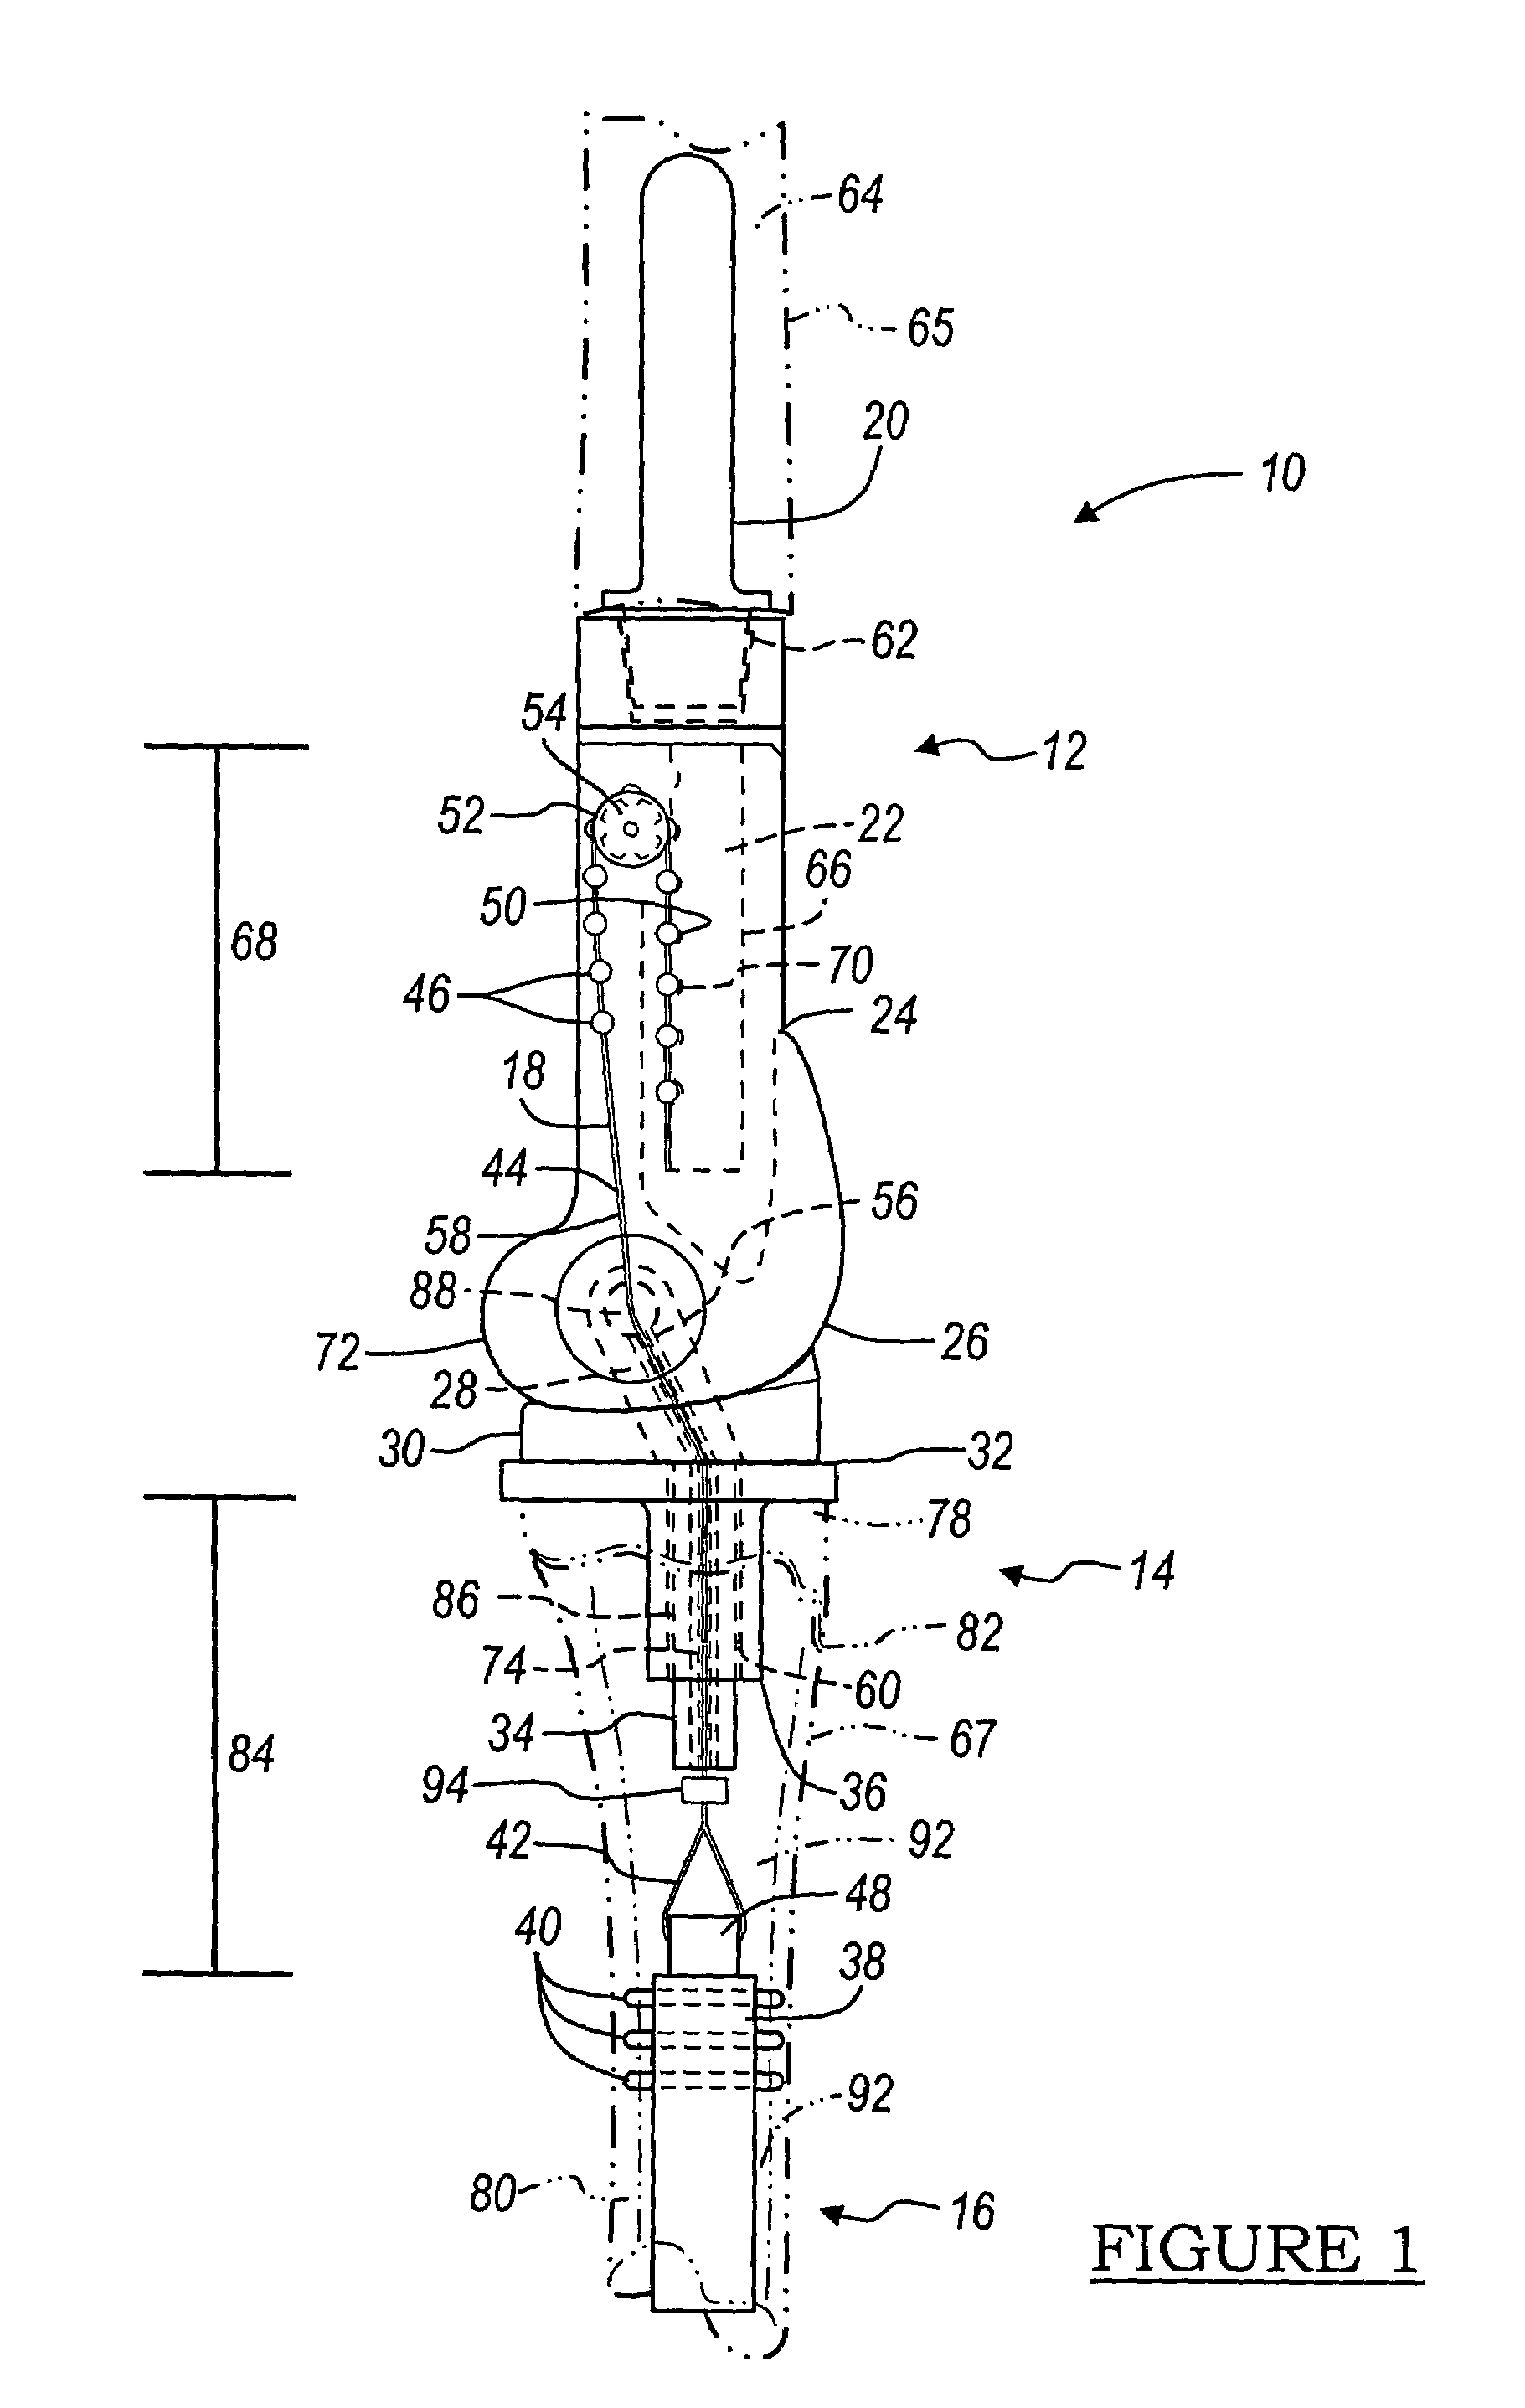 Method and apparatus for use of a non-invasive expandable implant